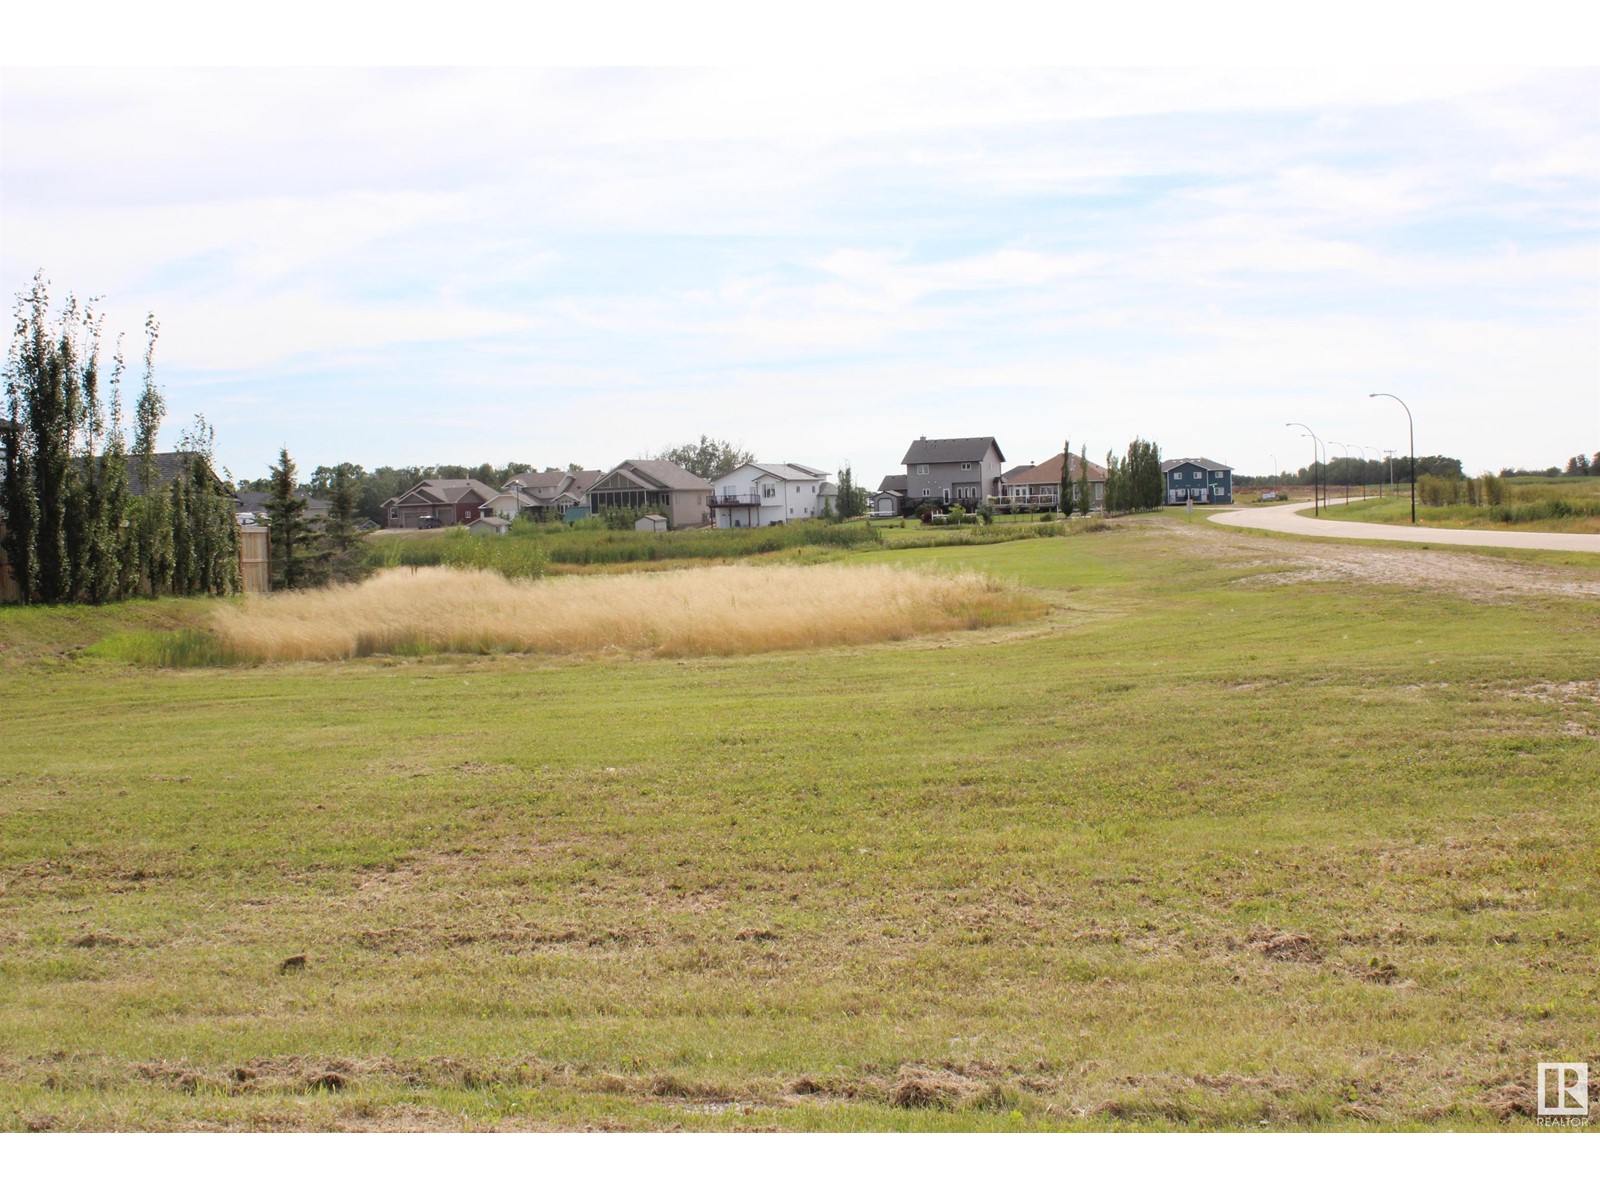 Vacant Land For Sale | 41 Whitetail Gr | Mundare | T0B3H0